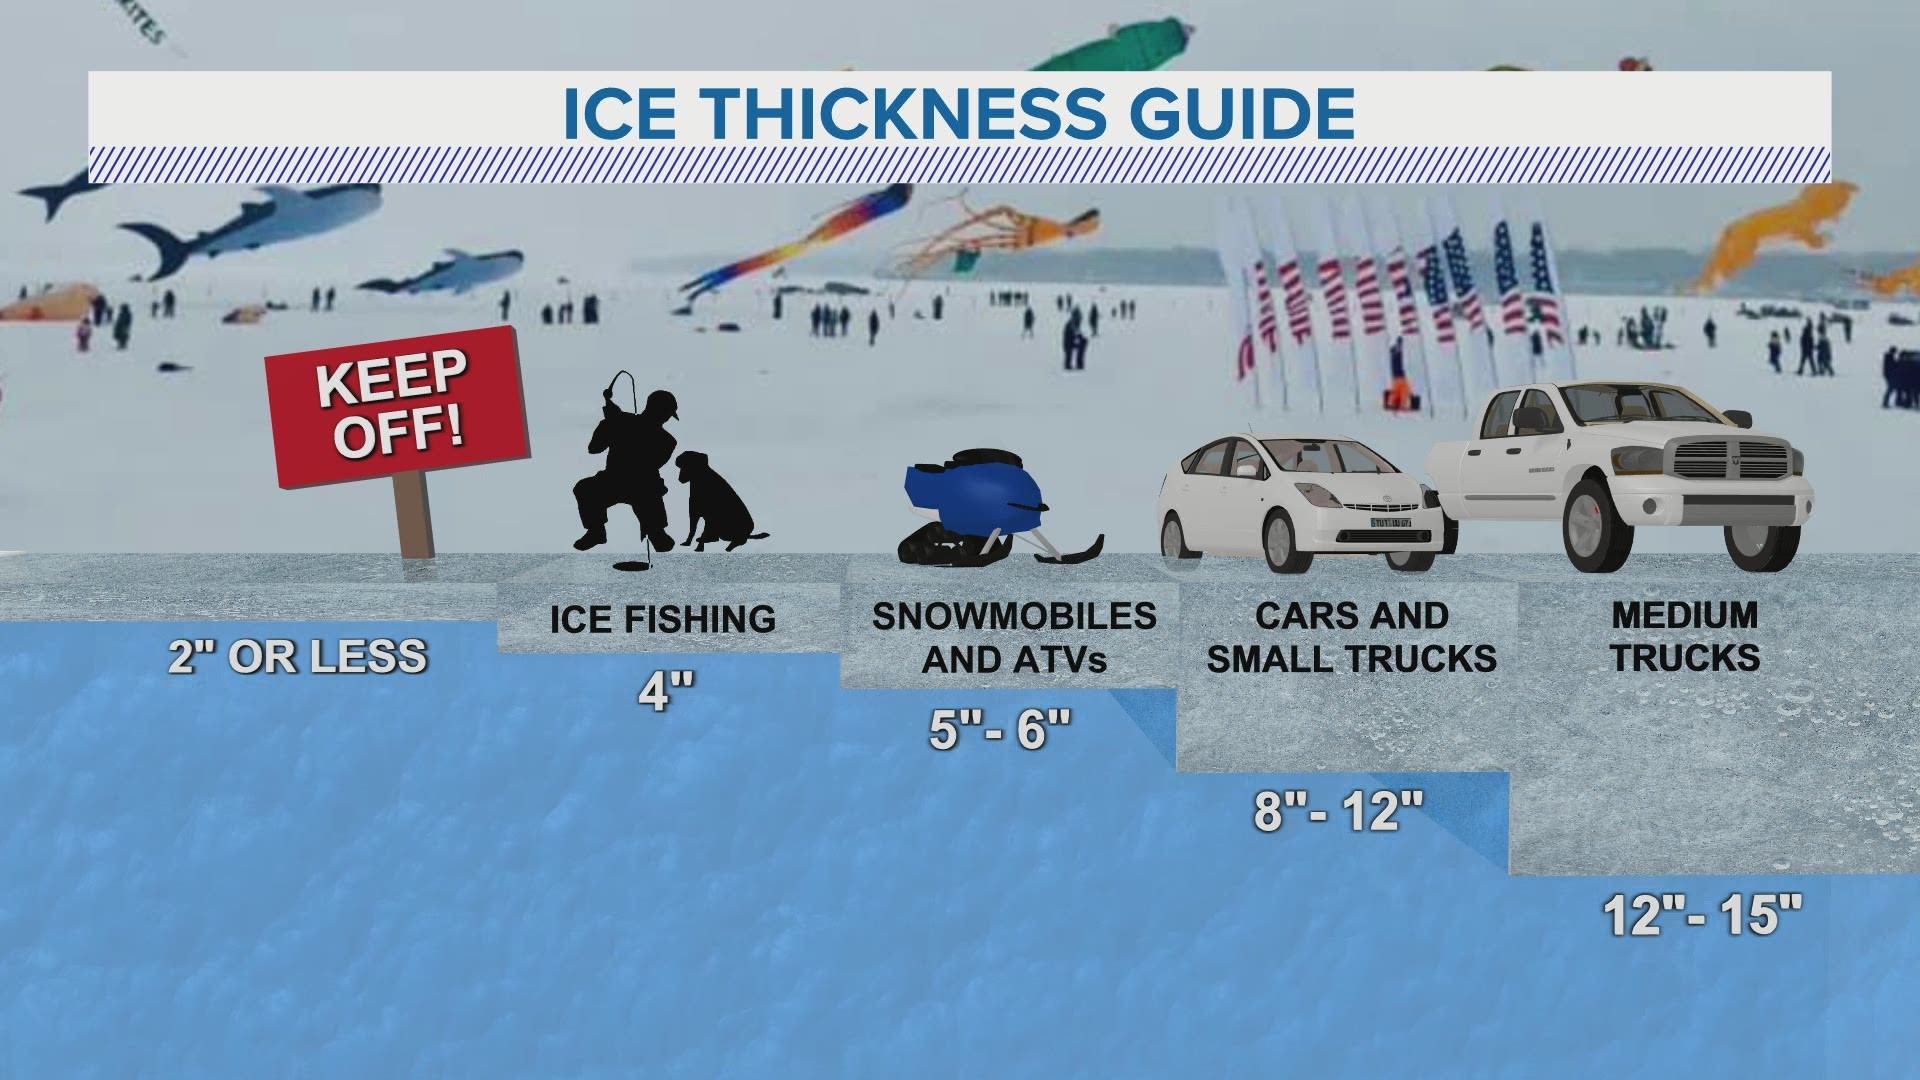 It's important to know how thick the ice is before going ice fishing or out for other recreational activities